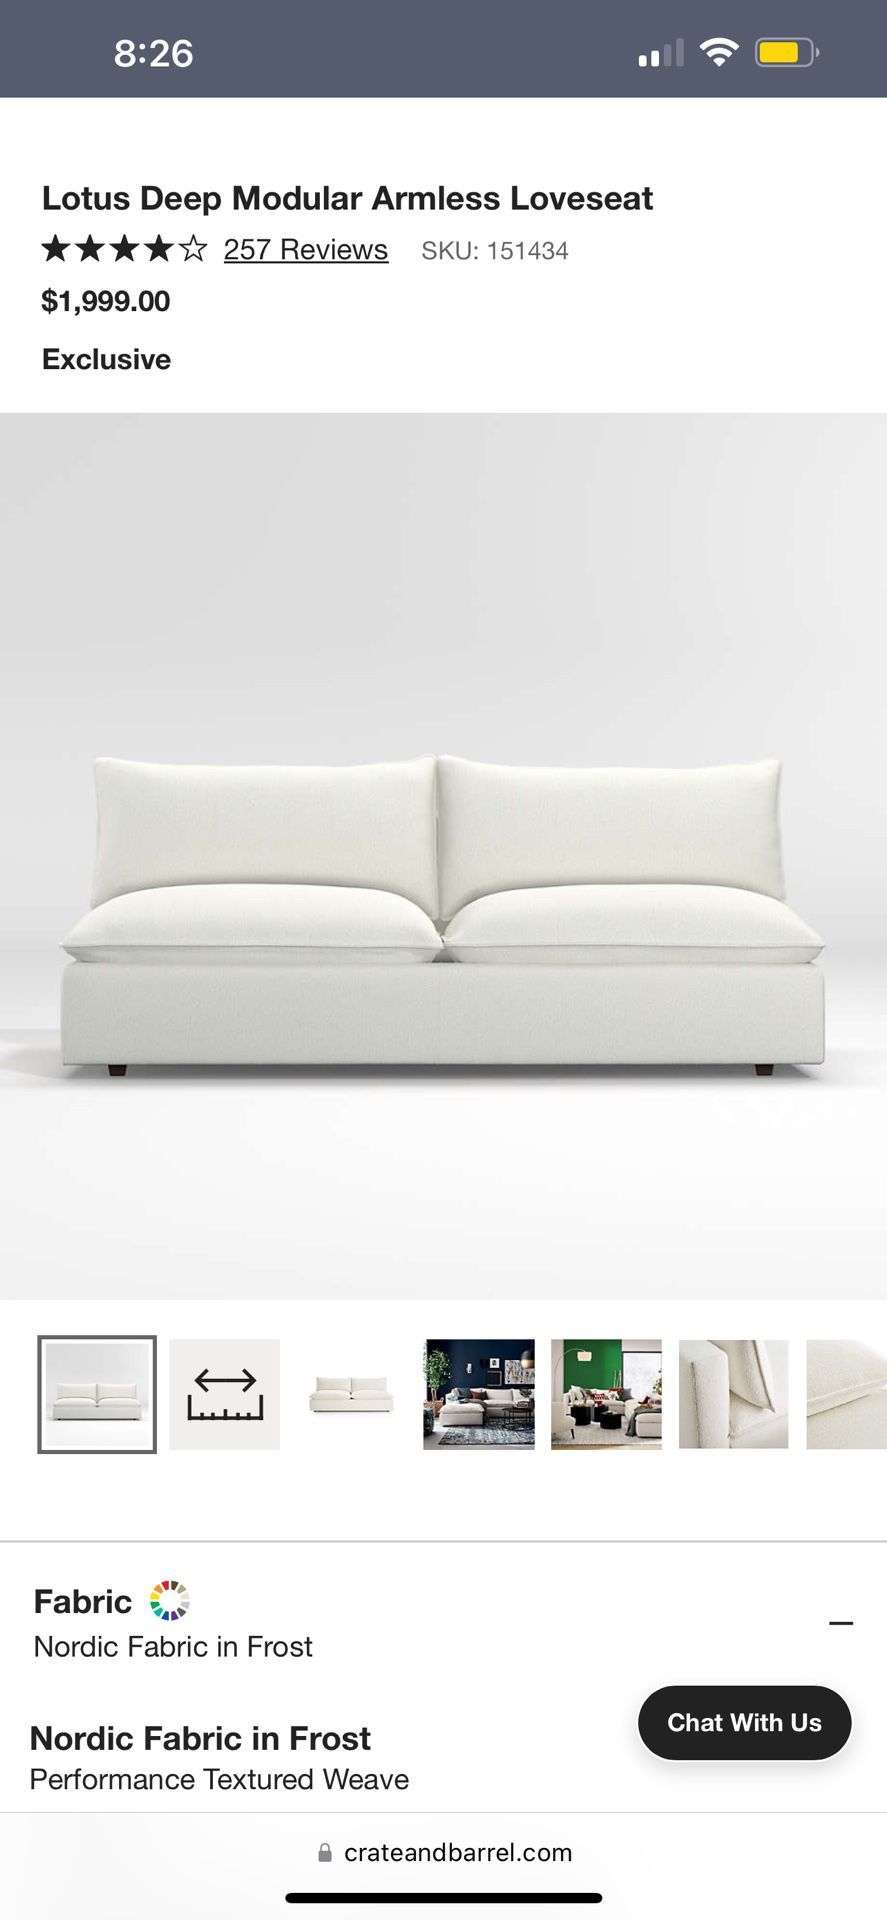 Great Condition - Crate & Barrel Lotus Loveseat Couch